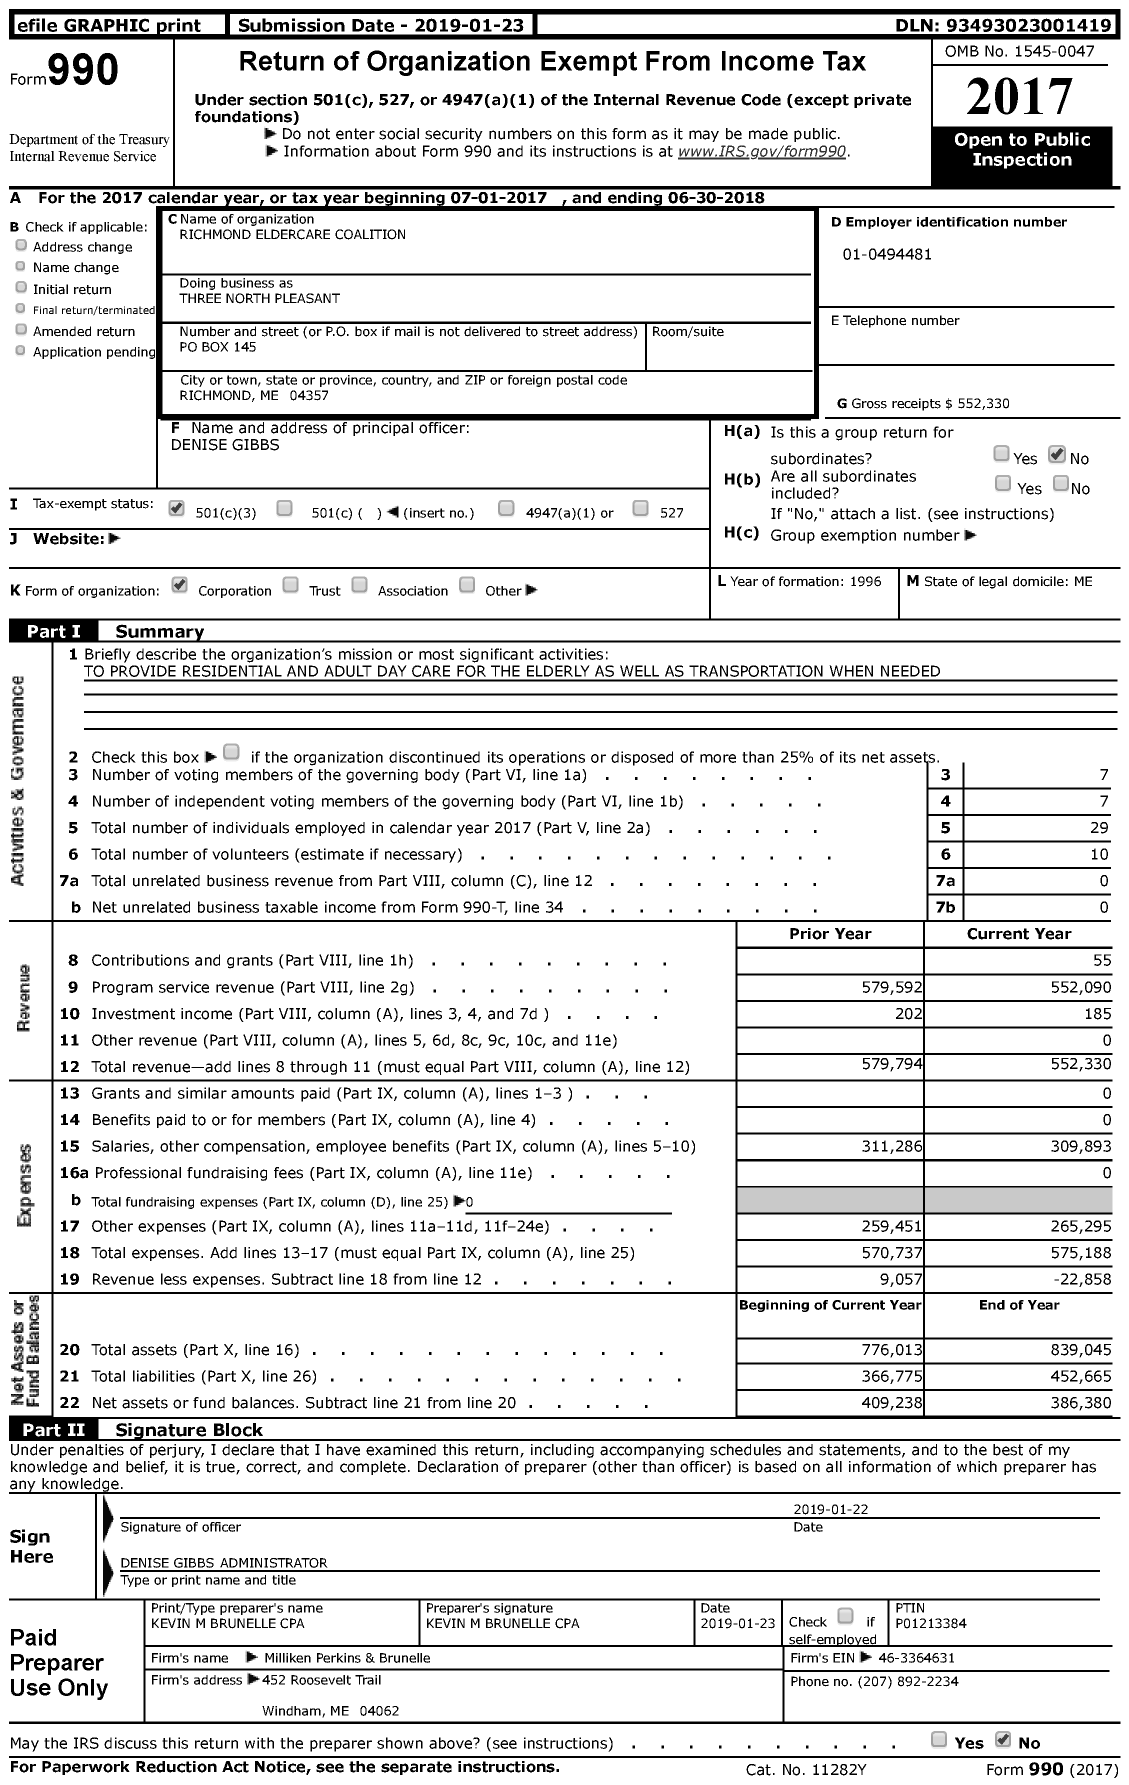 Image of first page of 2017 Form 990 for Three North Pleasant